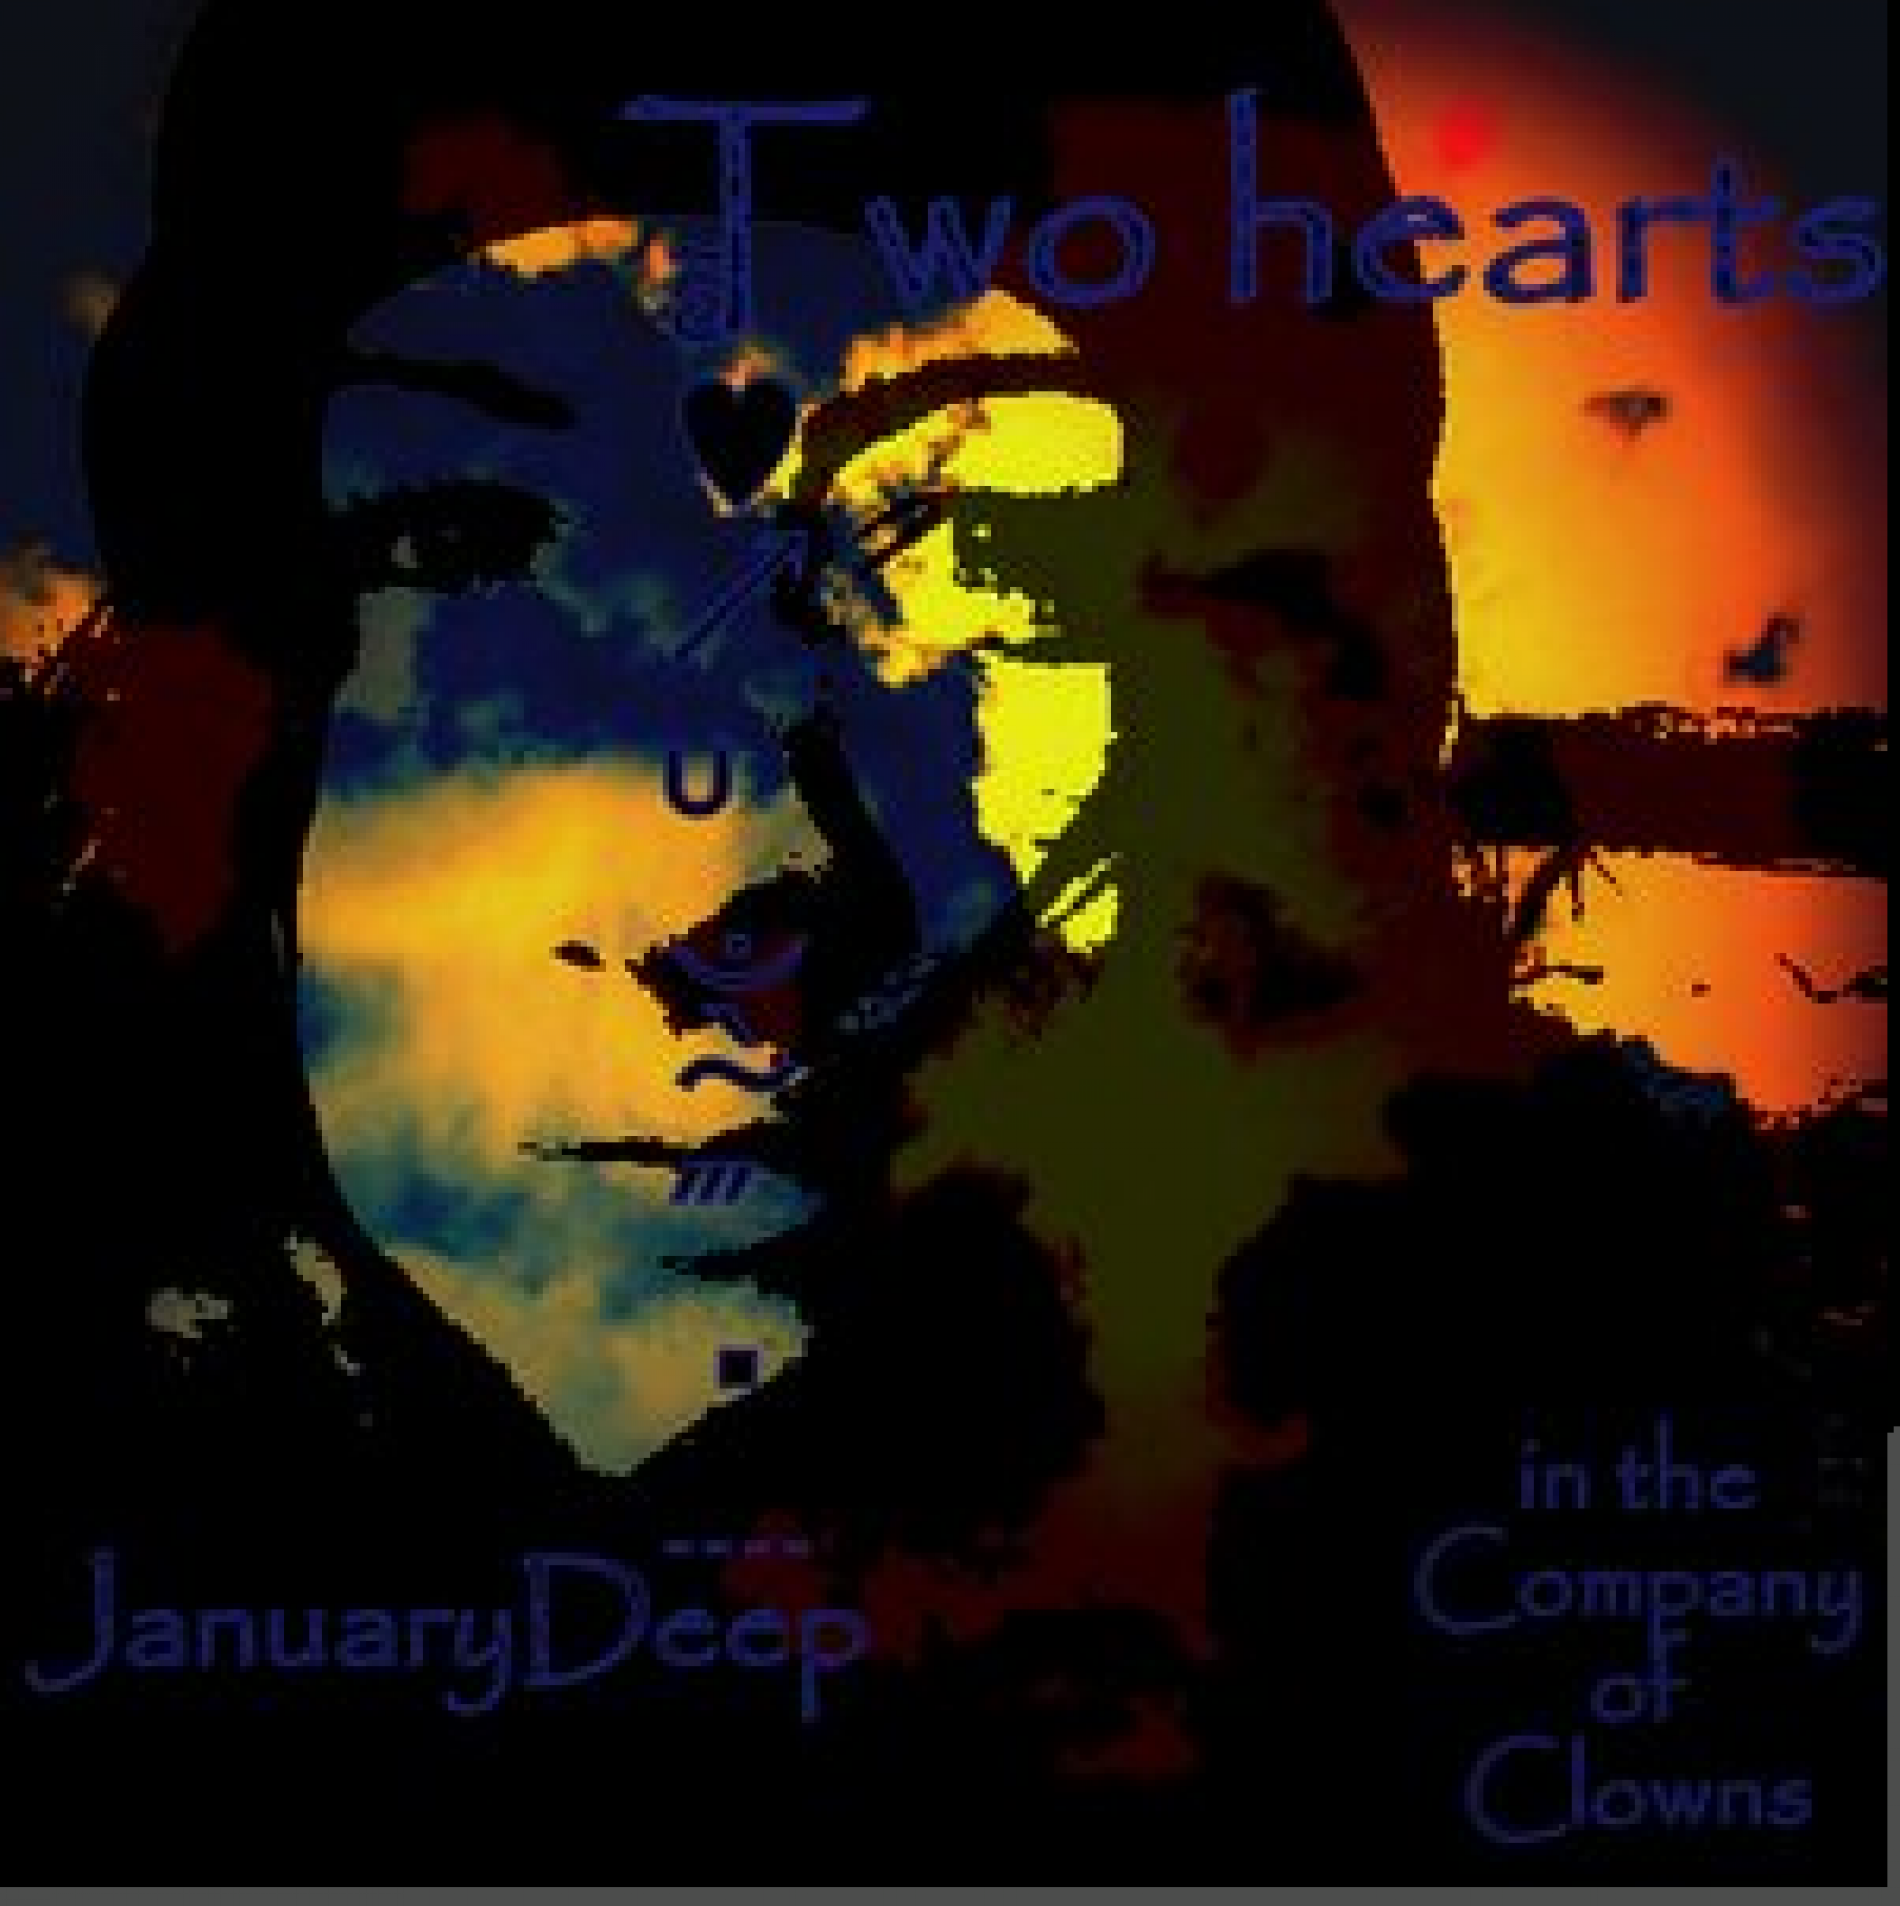 In The Company Of Clowns – Two hearts: JanuaryDeep